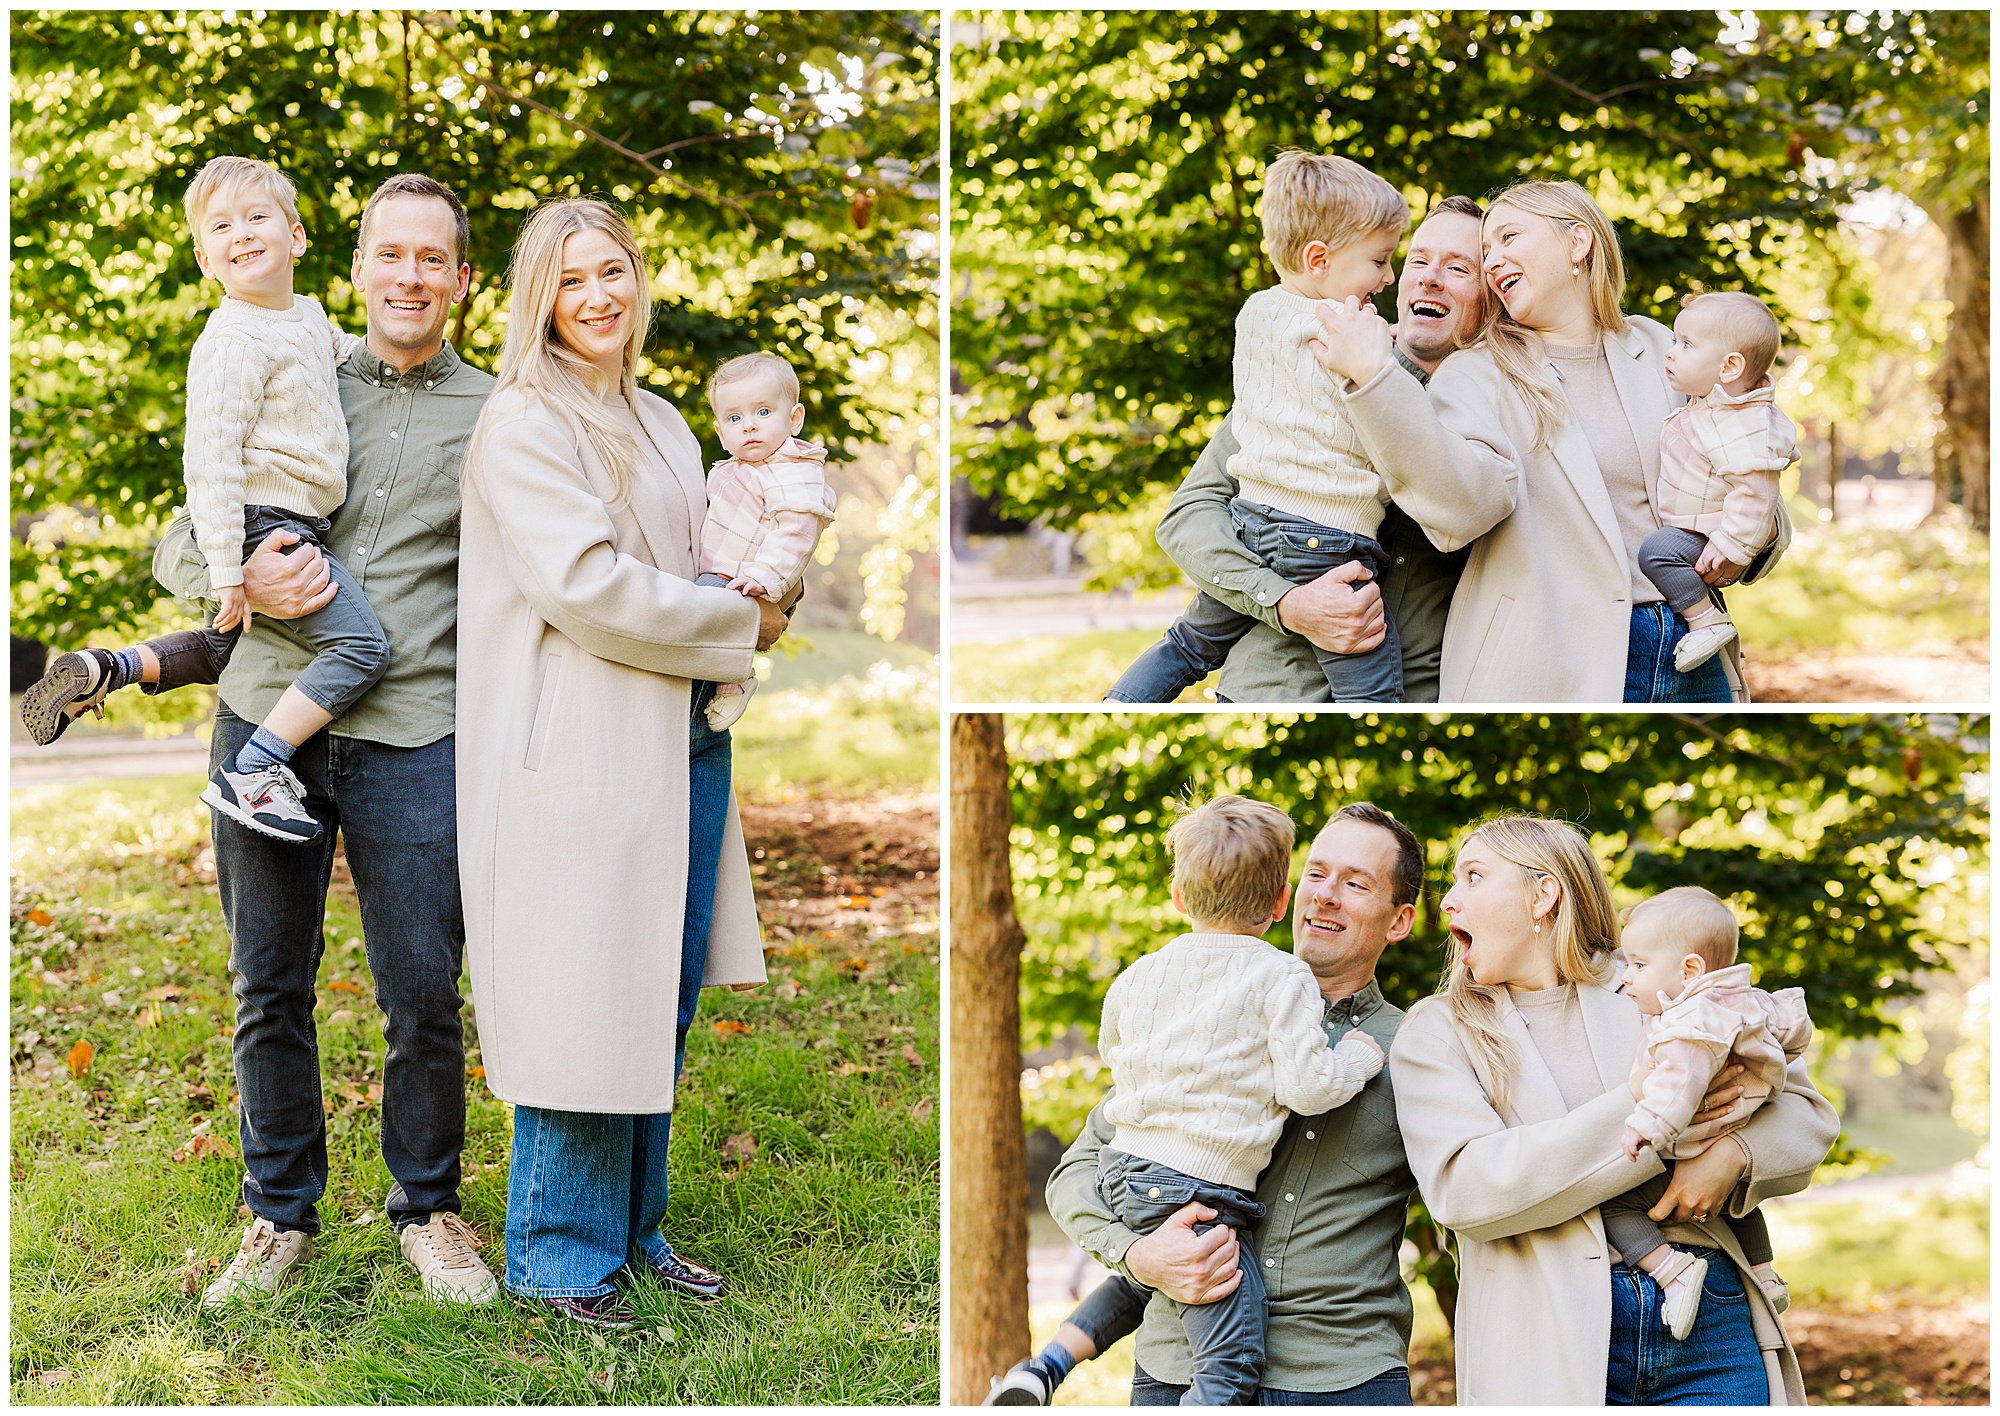 Perfect family session in Autumn